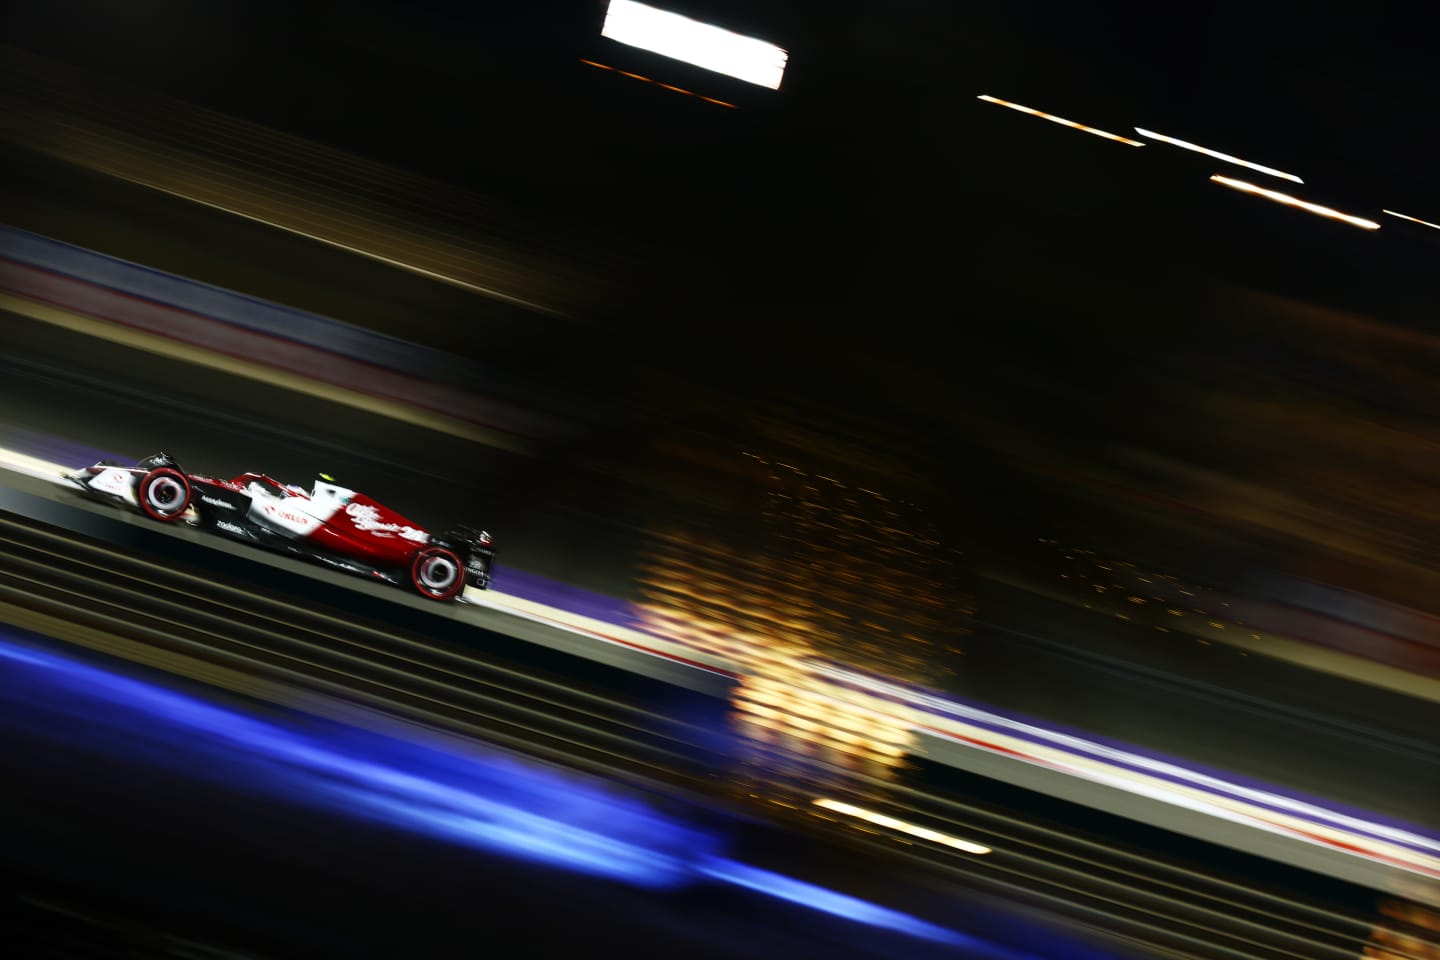 BAHRAIN, BAHRAIN - MARCH 18: Zhou Guanyu of China driving the (24) Alfa Romeo F1 C42 Ferrari on track during practice ahead of the F1 Grand Prix of Bahrain at Bahrain International Circuit on March 18, 2022 in Bahrain, Bahrain. (Photo by Mark Thompson/Getty Images)